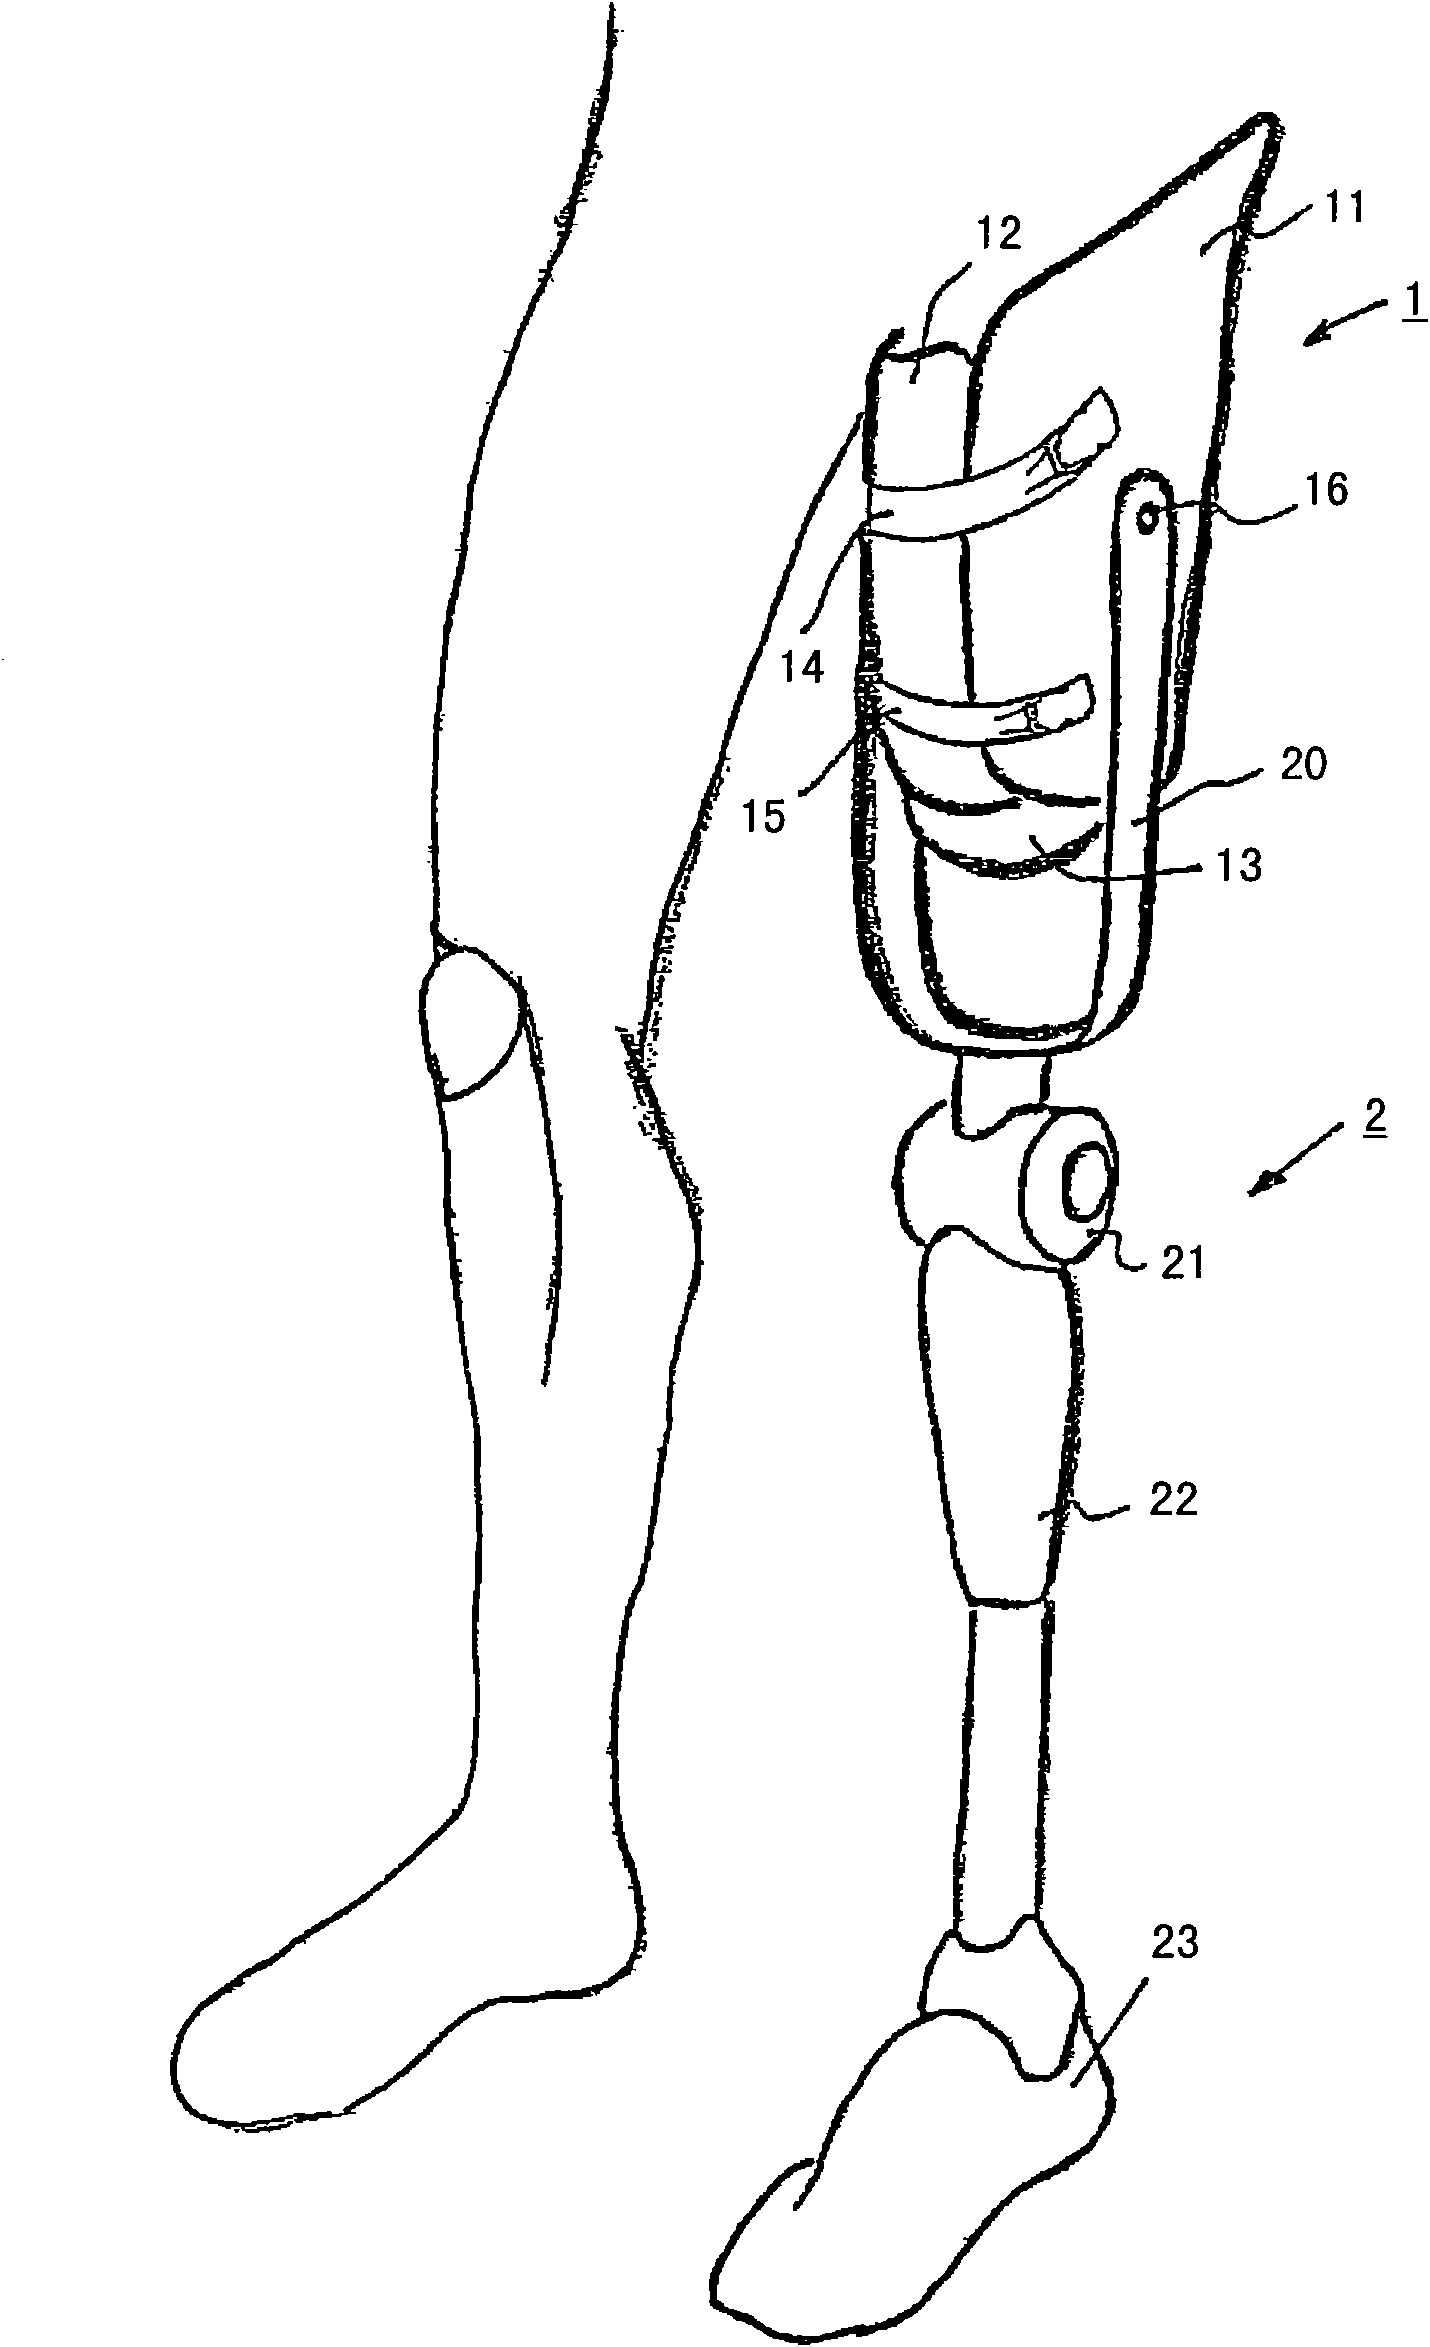 Prosthesis shaft and system comprising a prosthesis shaft and prosthesis device